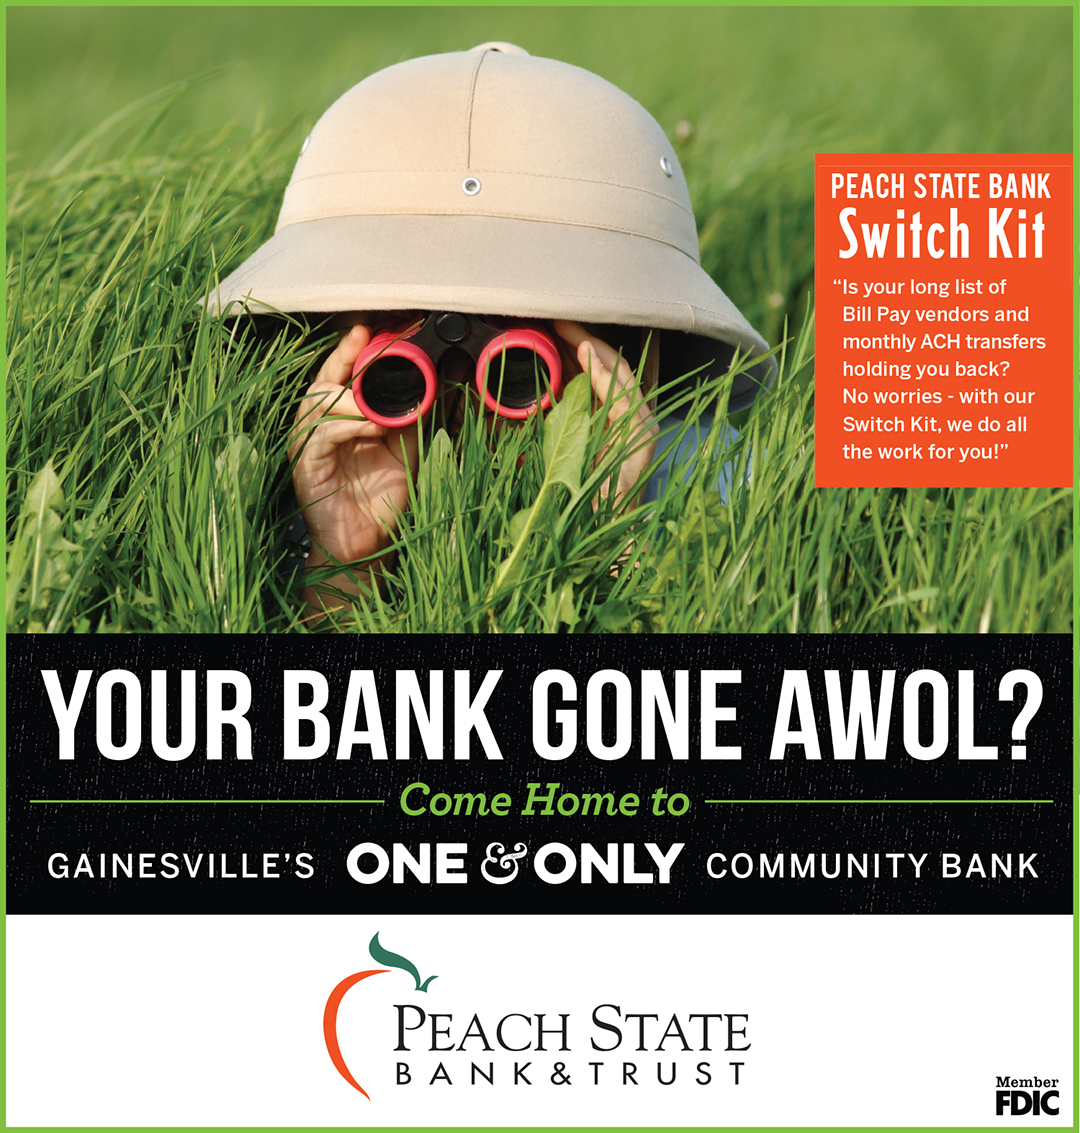 Peach State Bank - Advertising